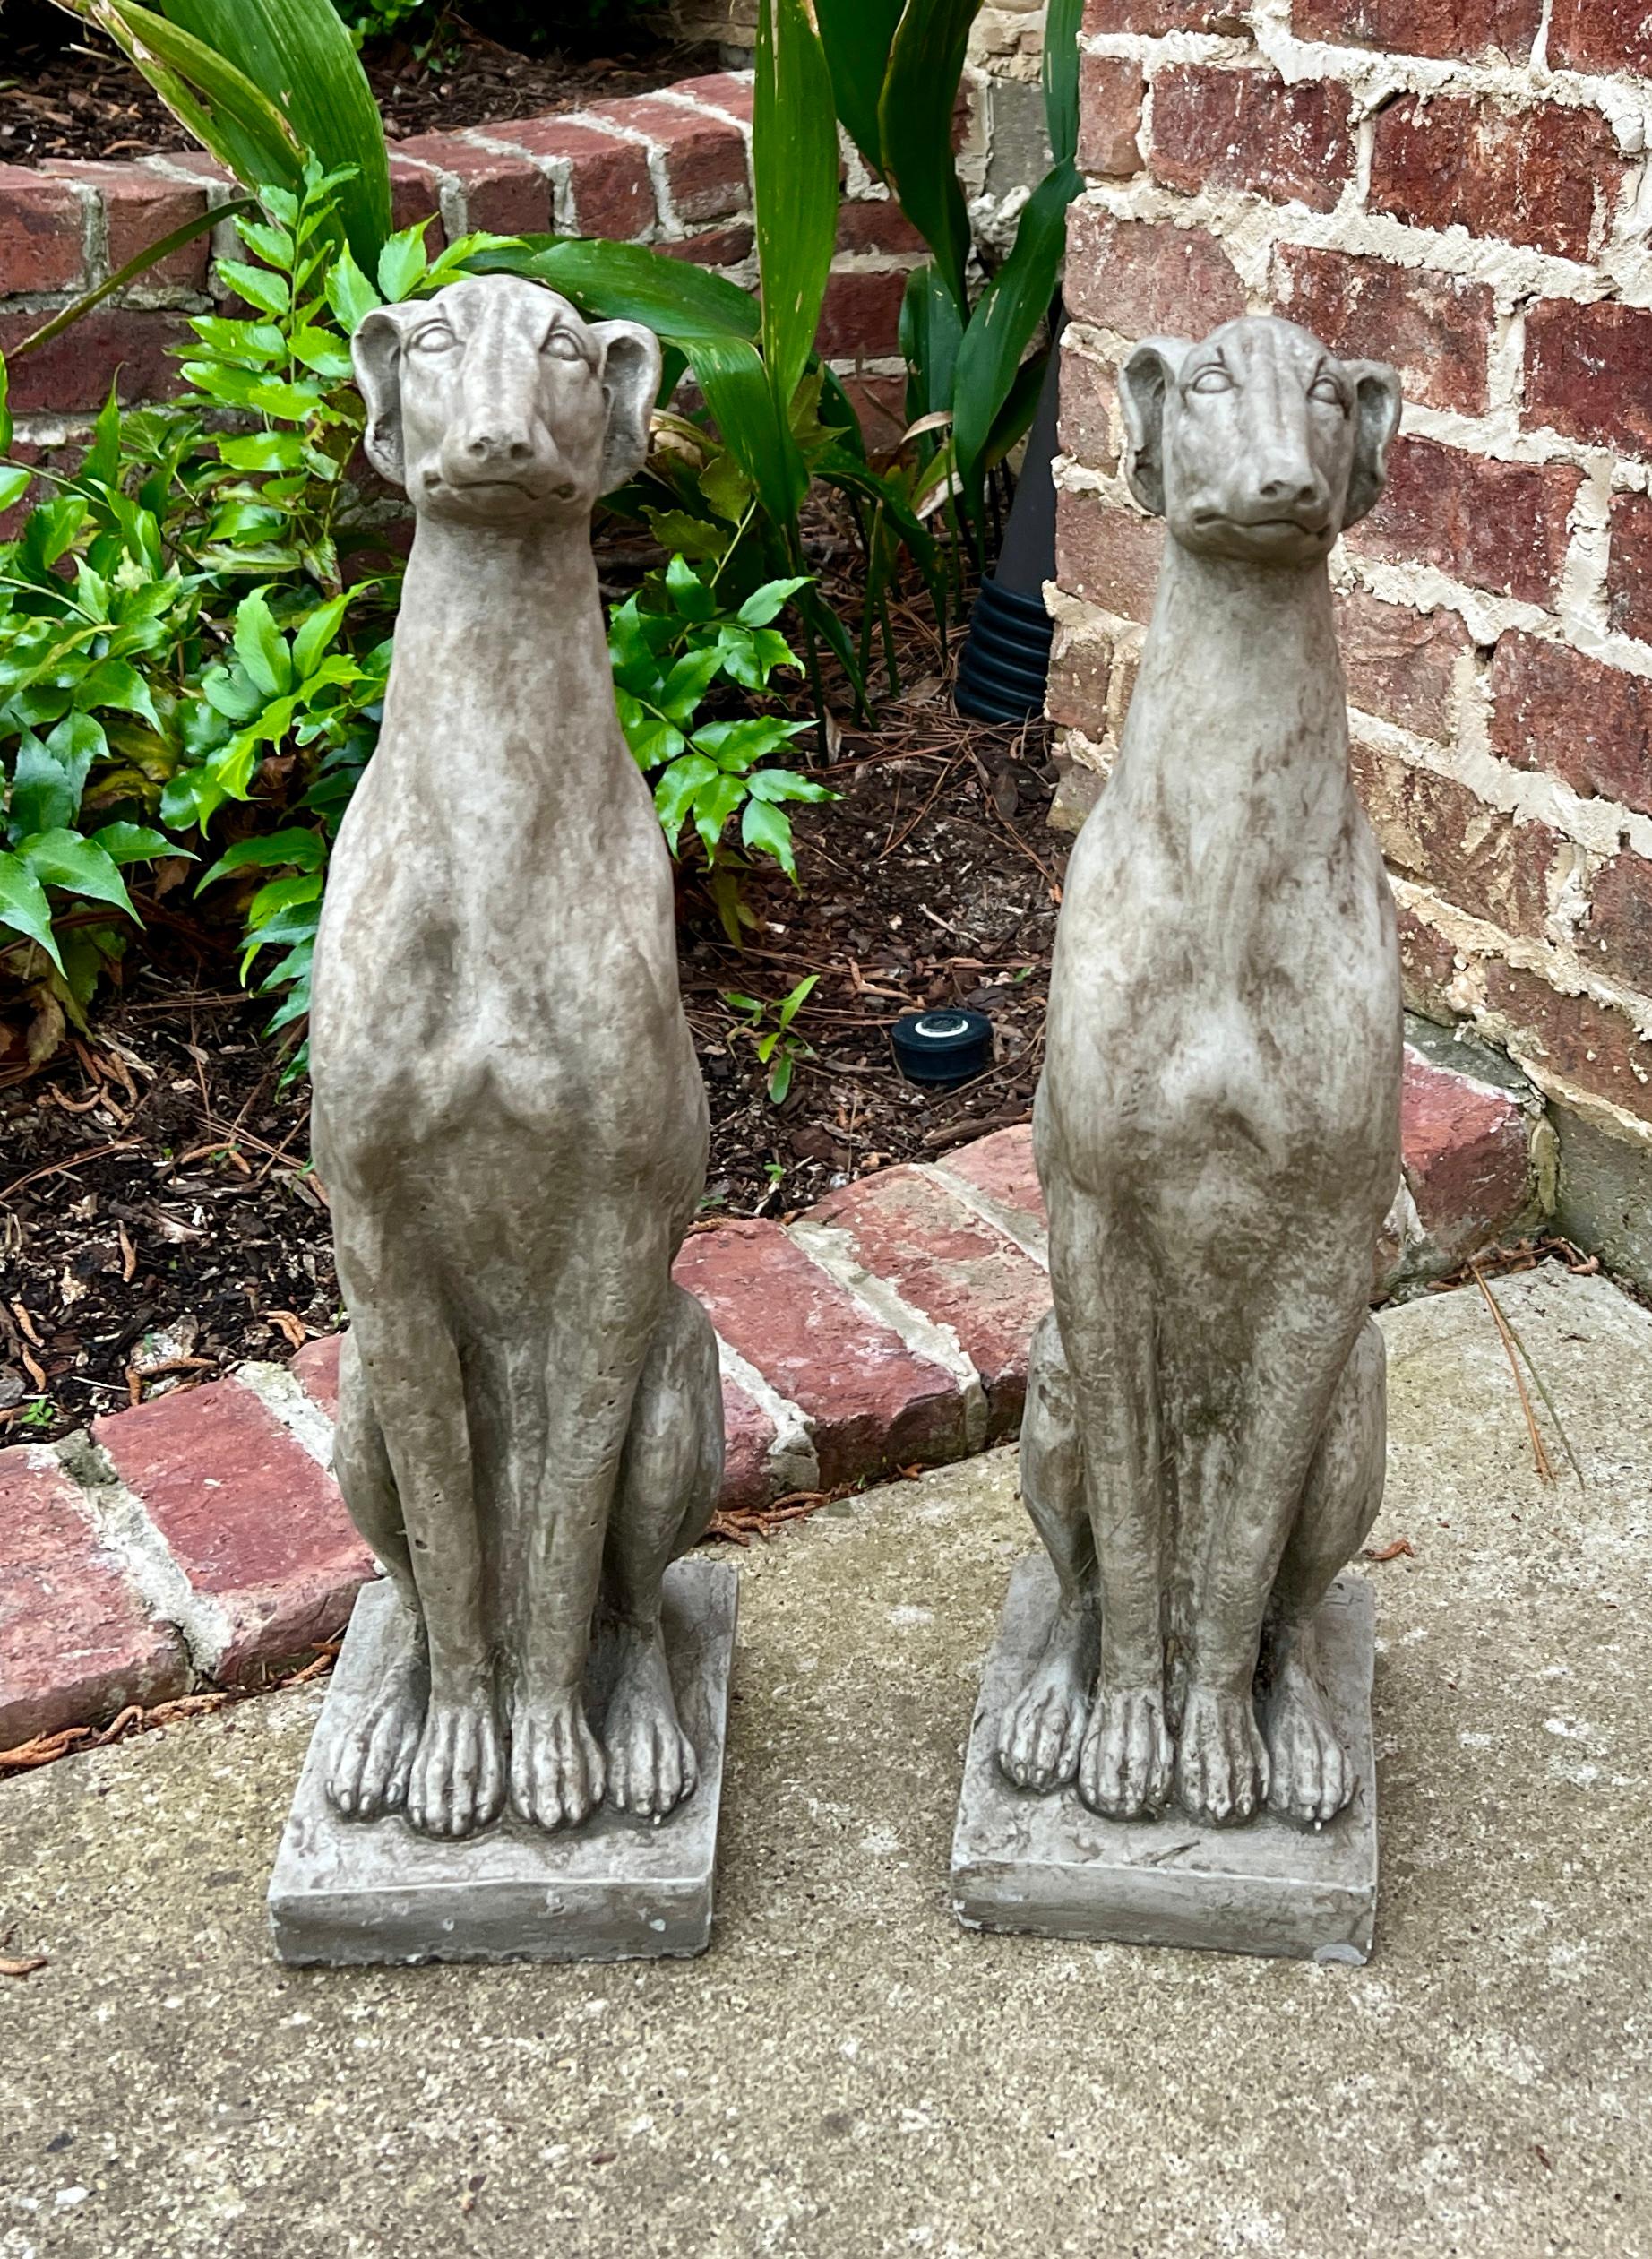 Vintage English Cast Stone Statues PAIR DOGS/WHIPPETS Garden Figures Yard Decor

Original aged patina sitting on square base

The perfect accent piece or focal point in an entryway, garden, yard, flower bed, or sunroom

Each lion is 22